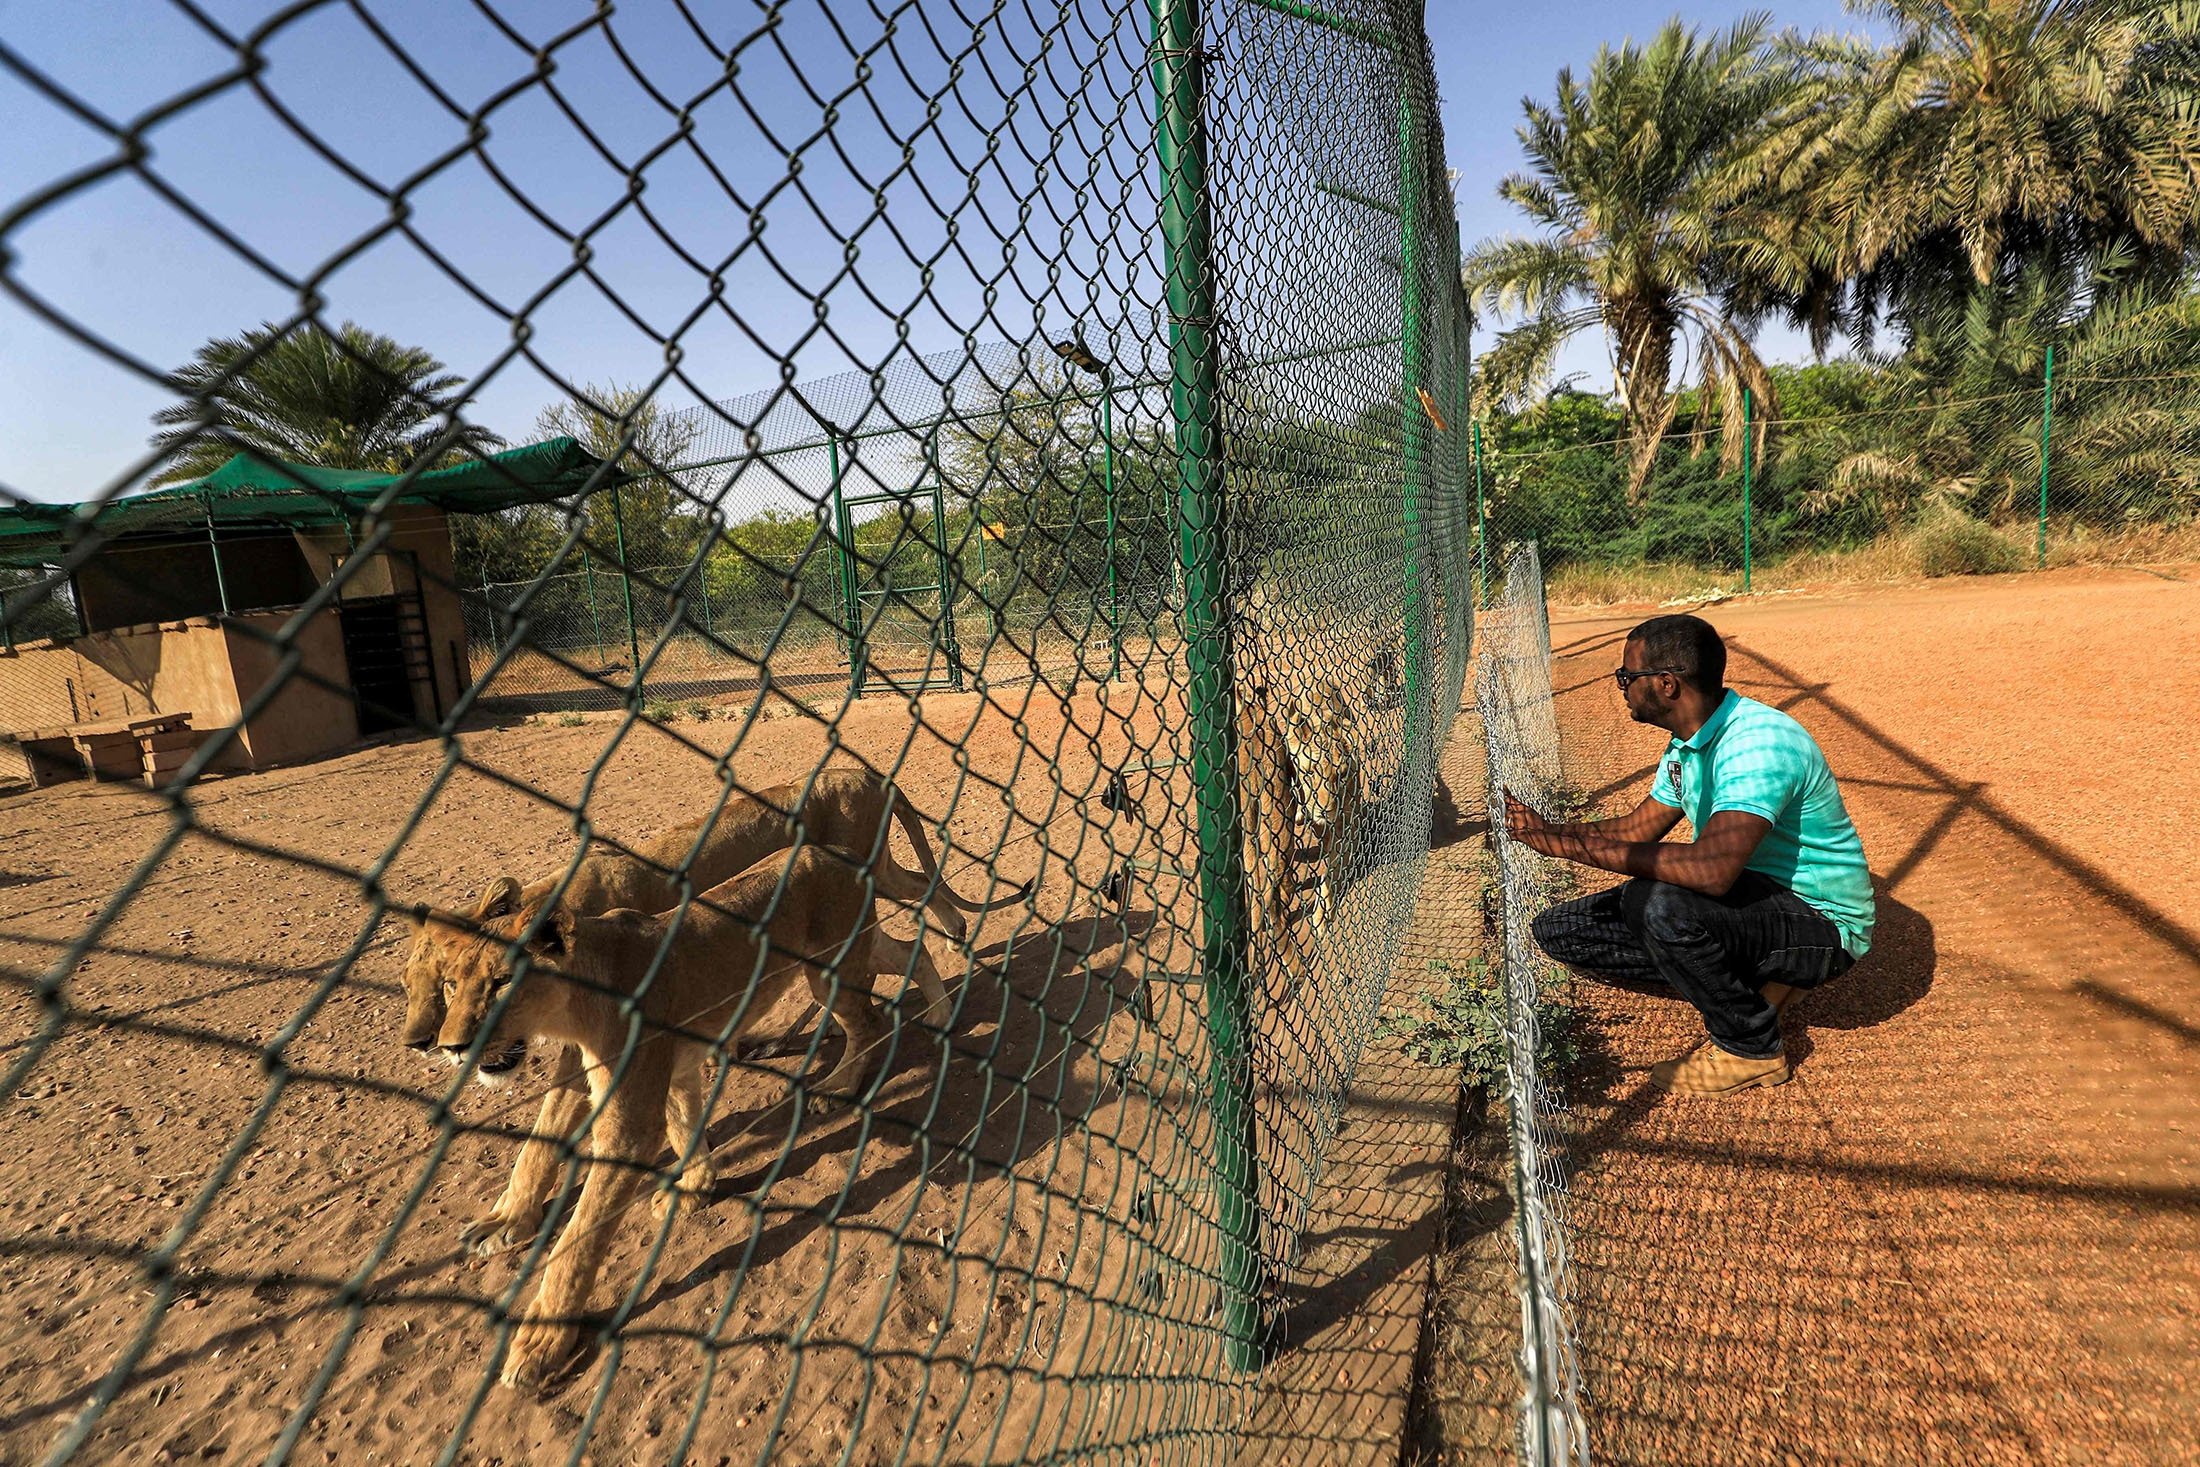 Othman Muhammad Salih, founder of the Sudan Animal Rescue center, sits behind the fence of a lion enclosure at the facility in al-Bageir, south of the capital Khartoum, Sudan, Feb.  28, 2022. (AFP Photo)